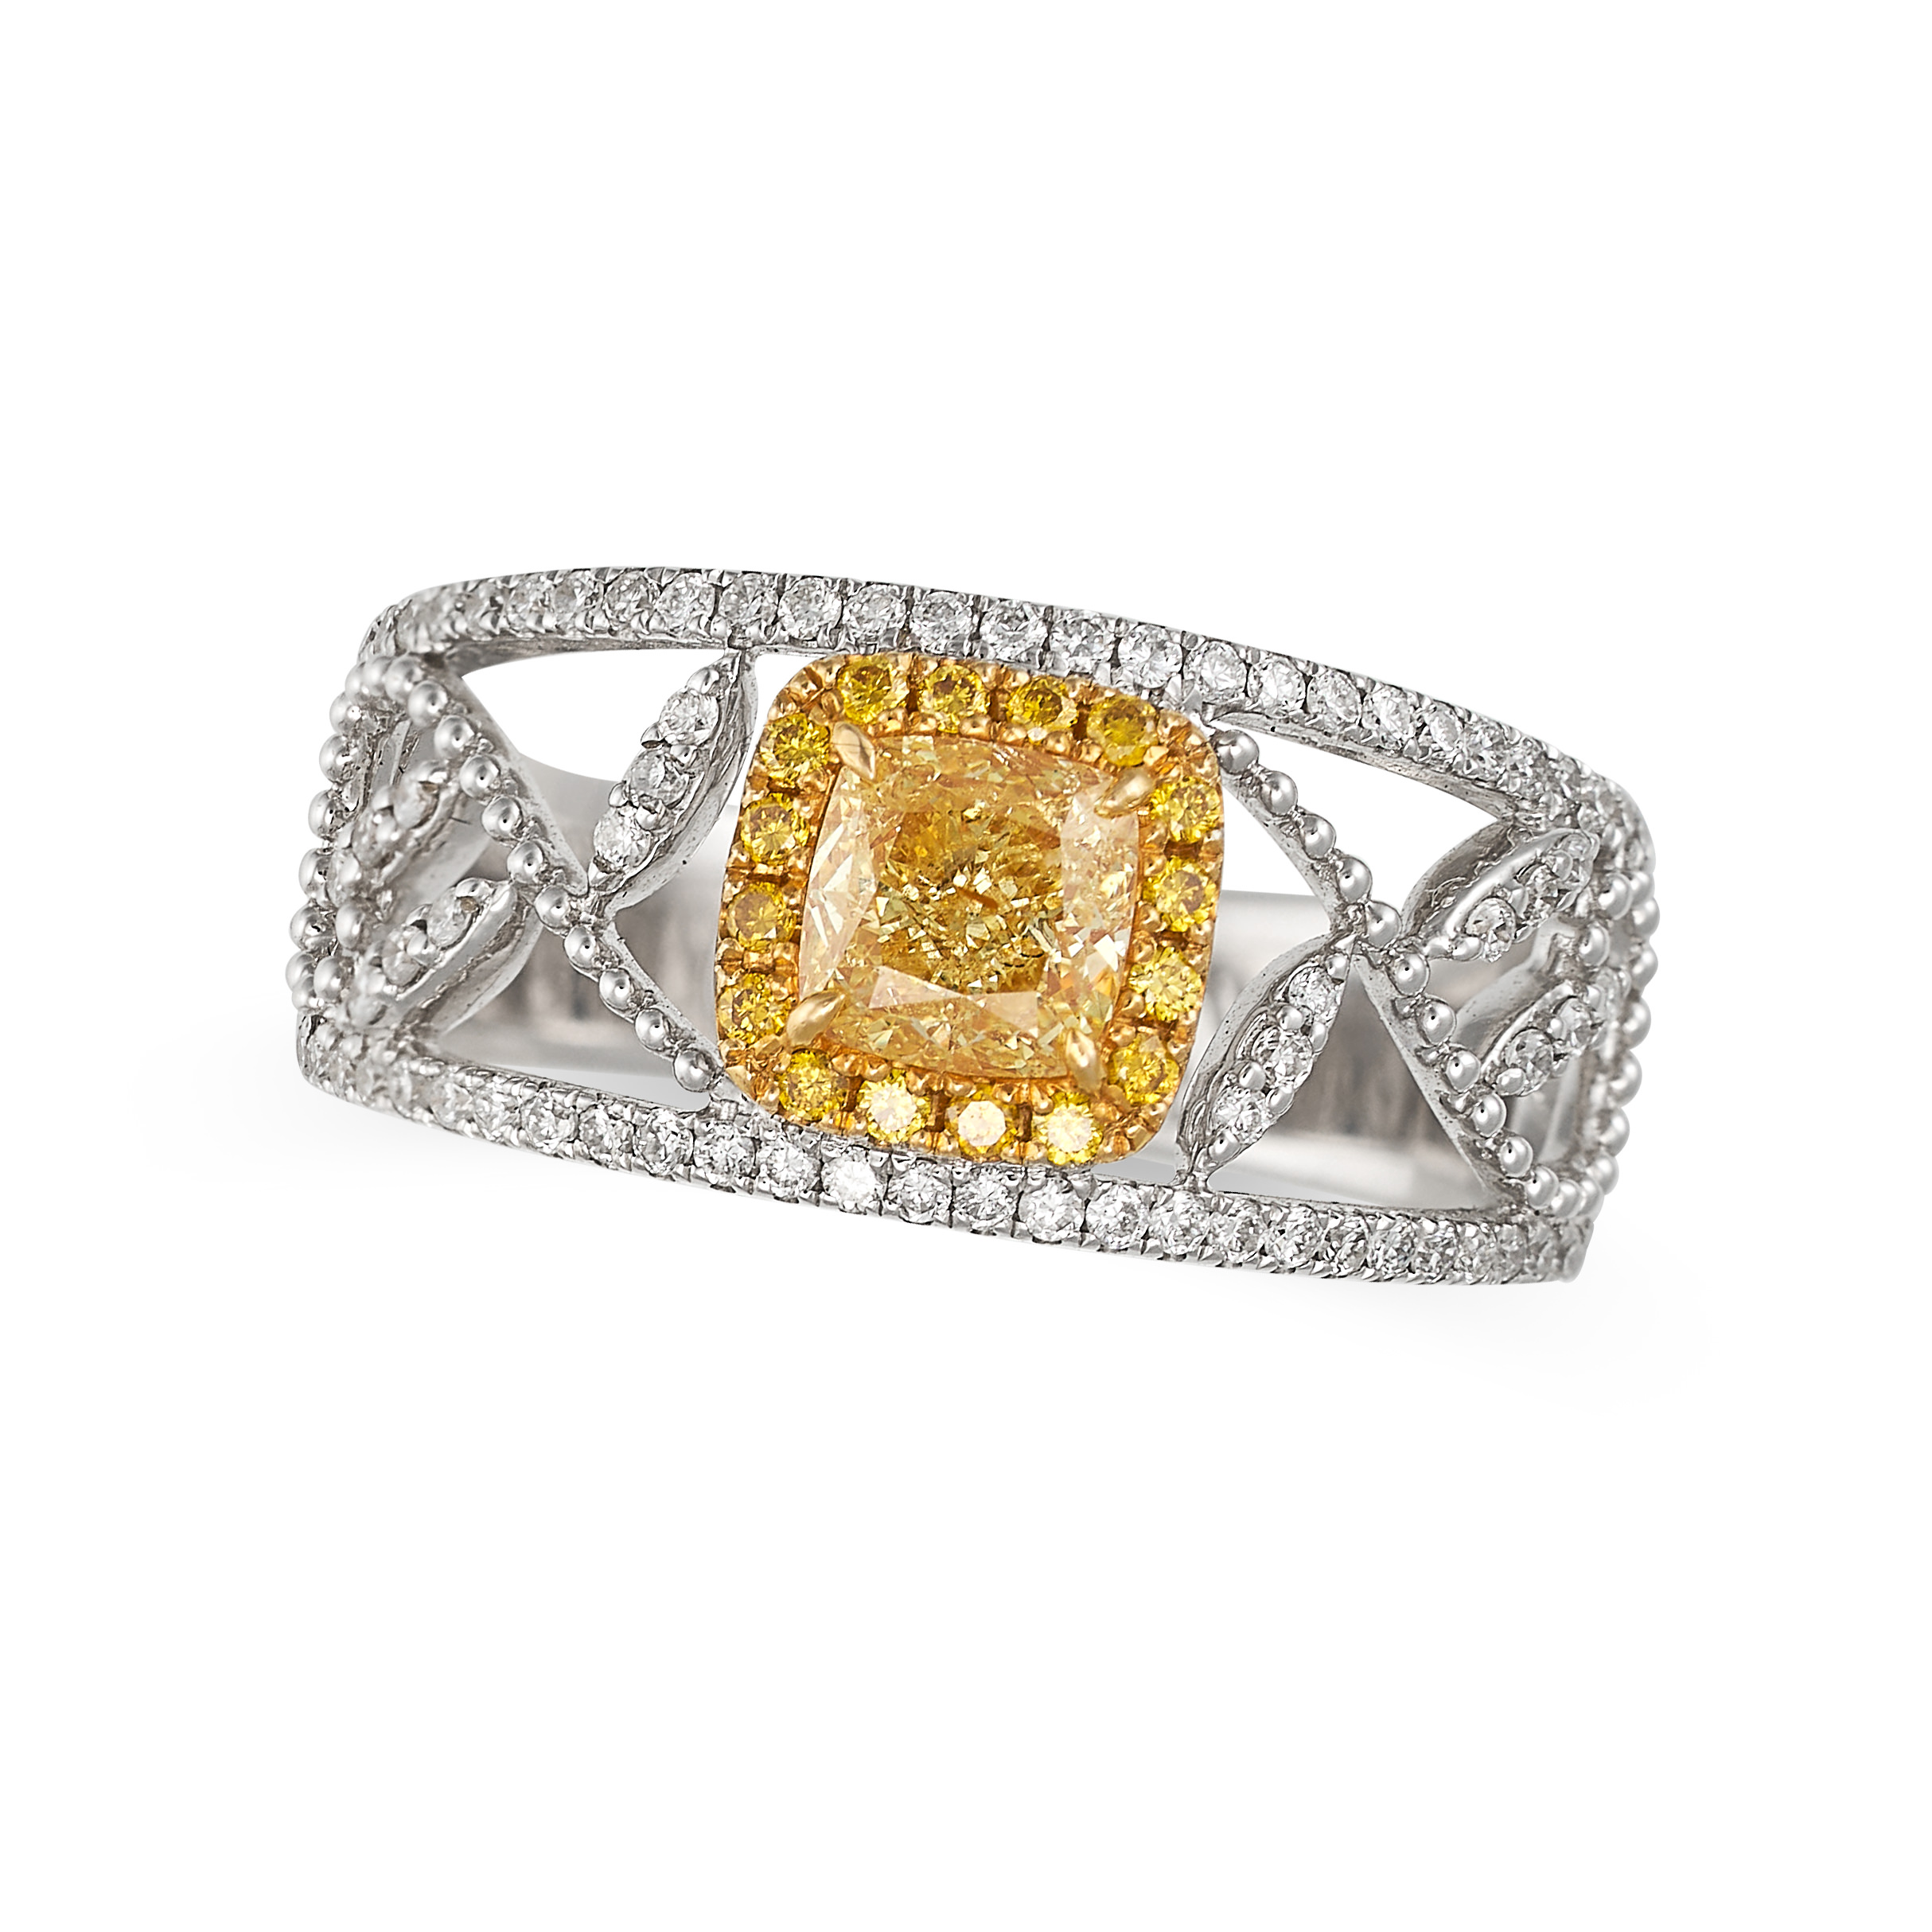 A NATURAL FANCY YELLOW DIAMOND DRESS RING in 18ct white gold, set with a cushion cut yellow